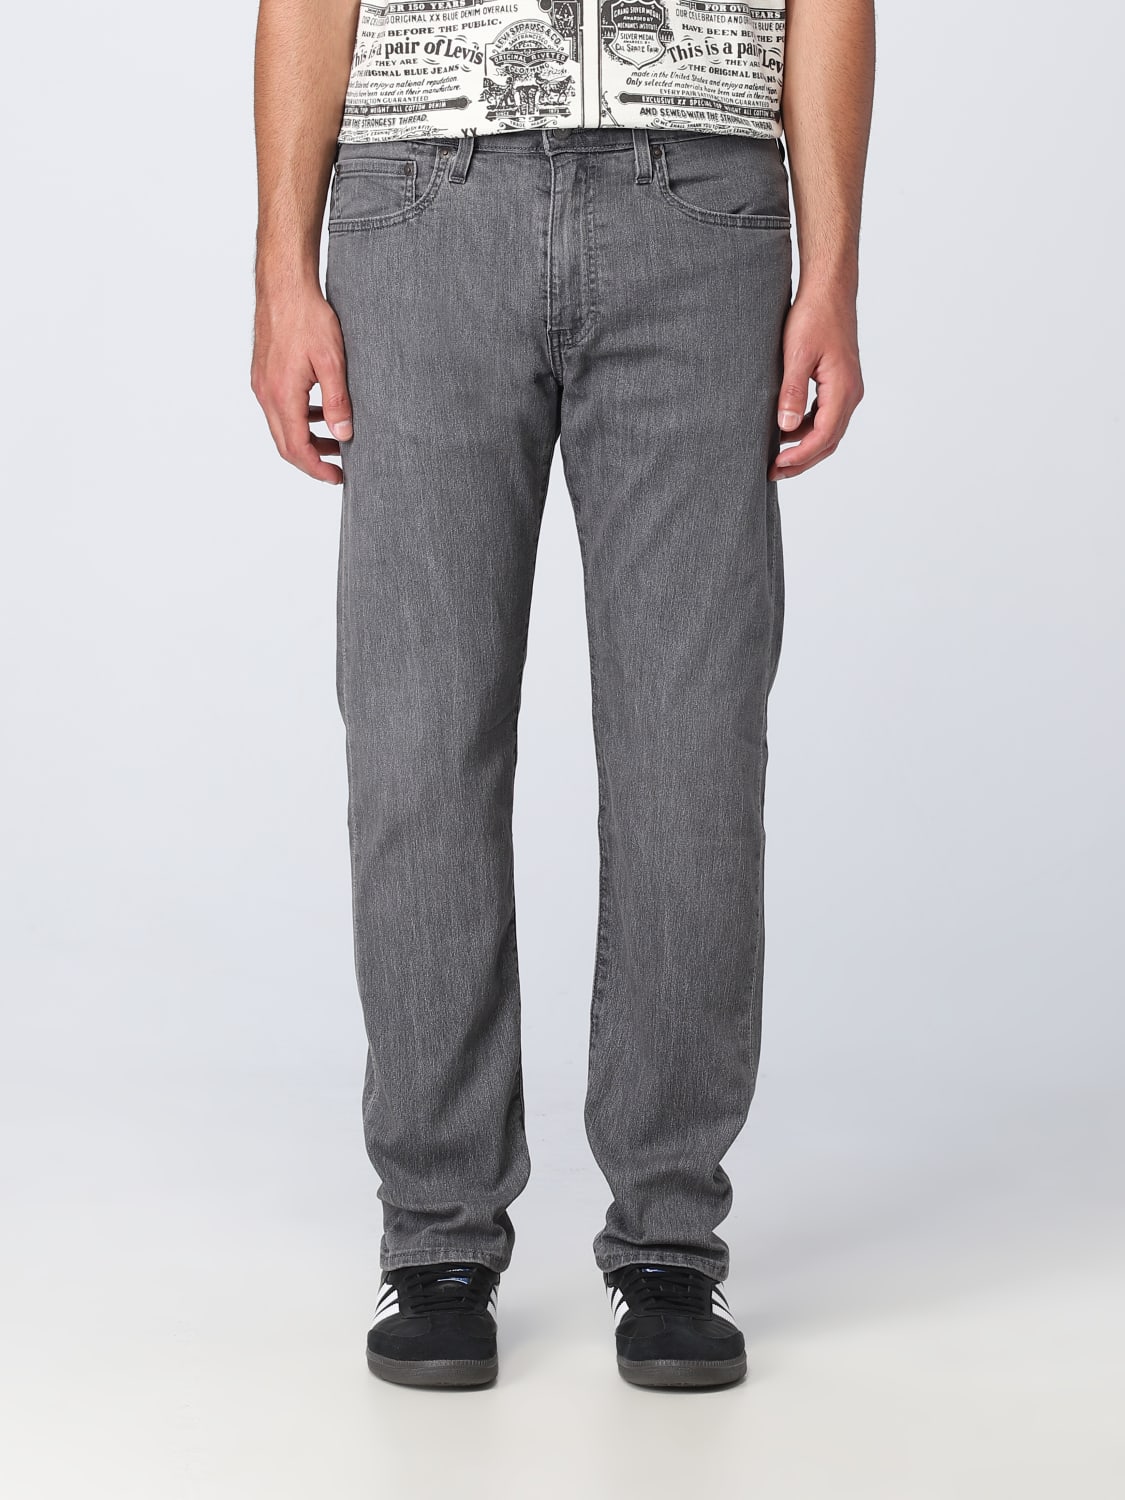 LEVI'S: jeans for man - Grey | Levi's jeans 29507 online on GIGLIO.COM